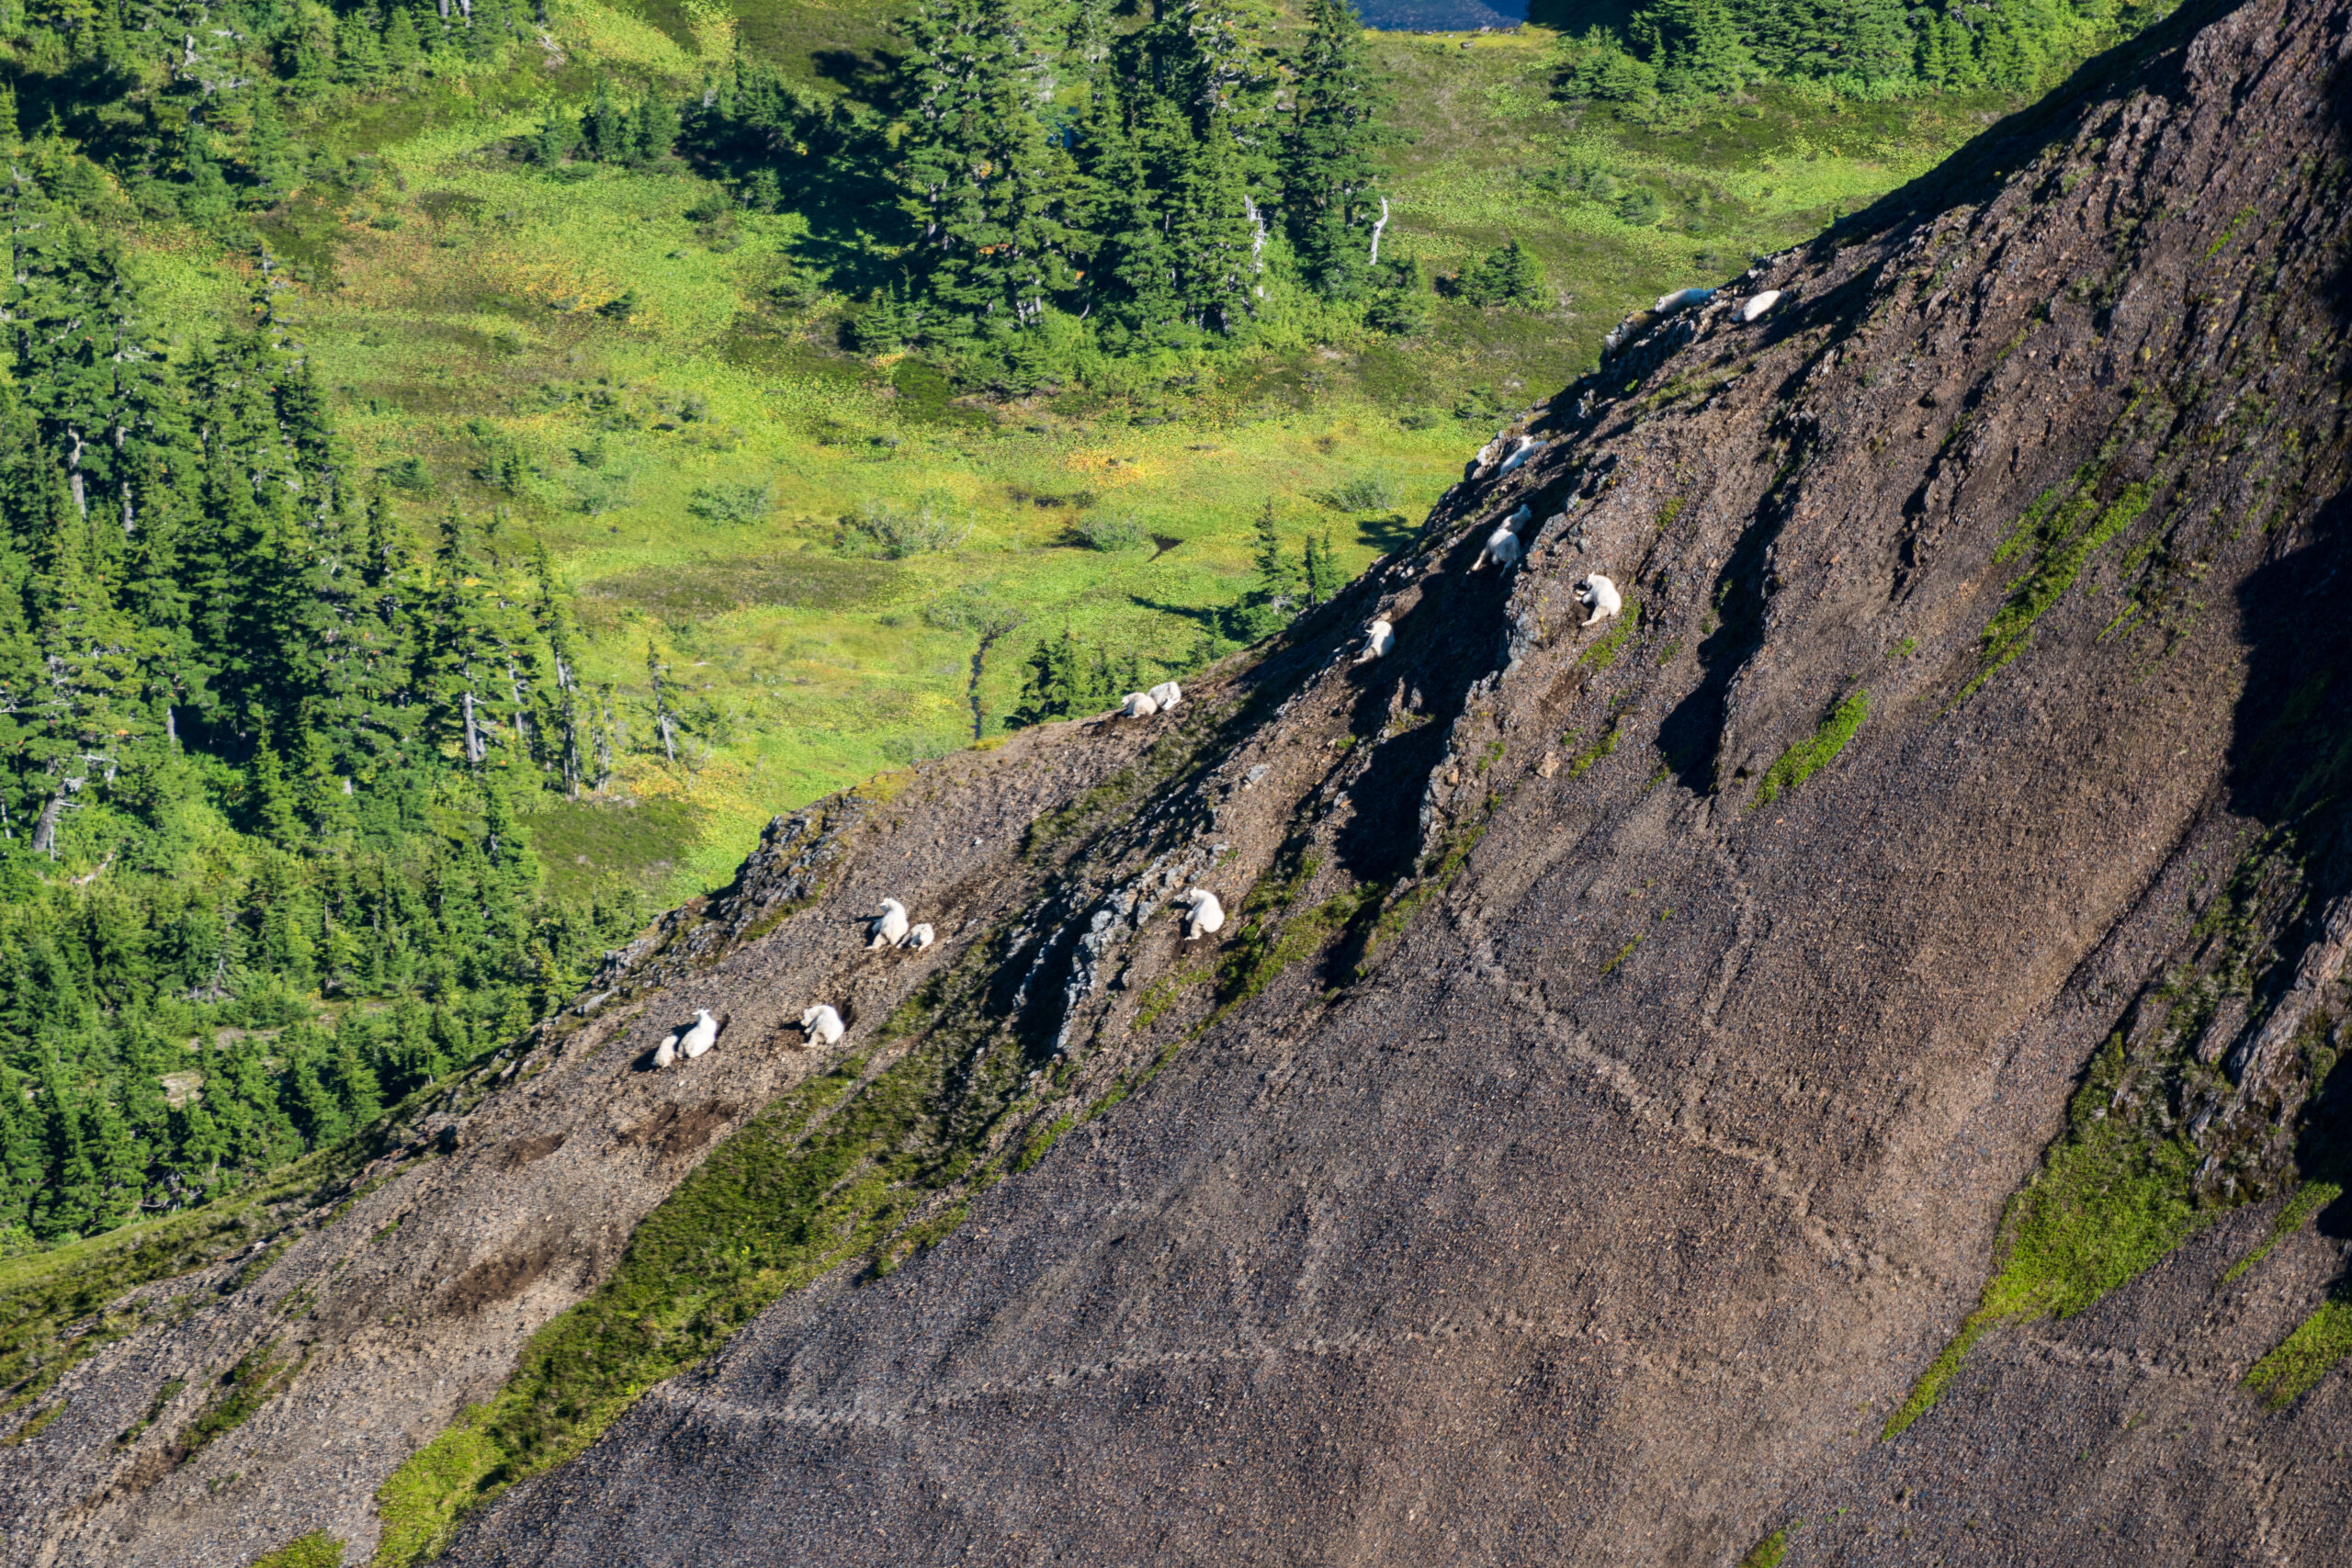 A herd of mountain goats, resting on a rock mountainside.